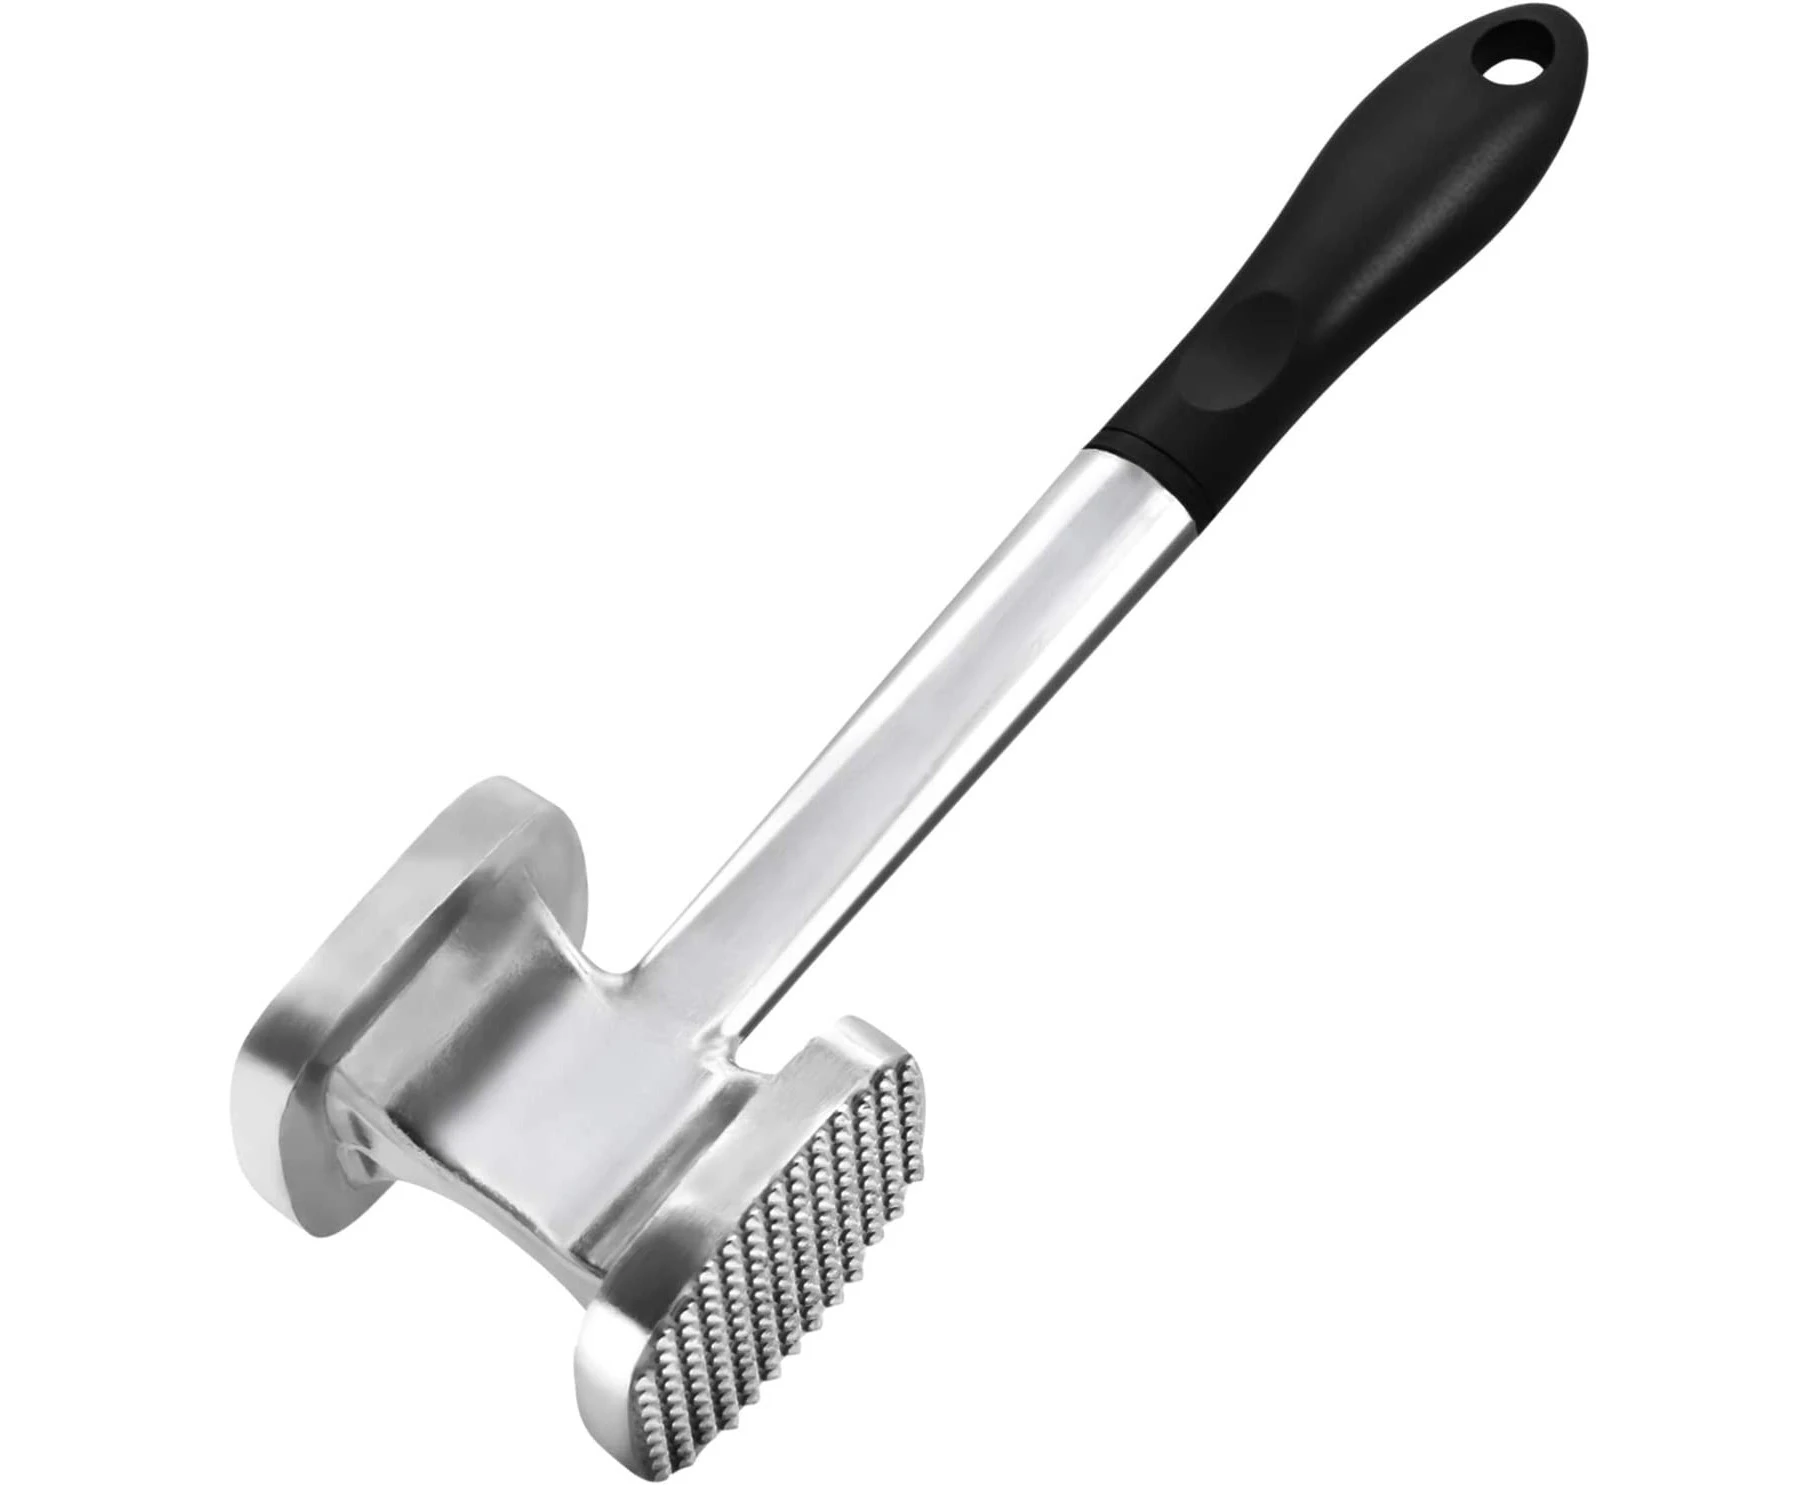 HSNMAFWIN-Large Size Meat Tenderizer Hammer. Practical Design Meat Mallet/Meat  Pounder Tool For Breaking Down Tough Meat Efficiently.